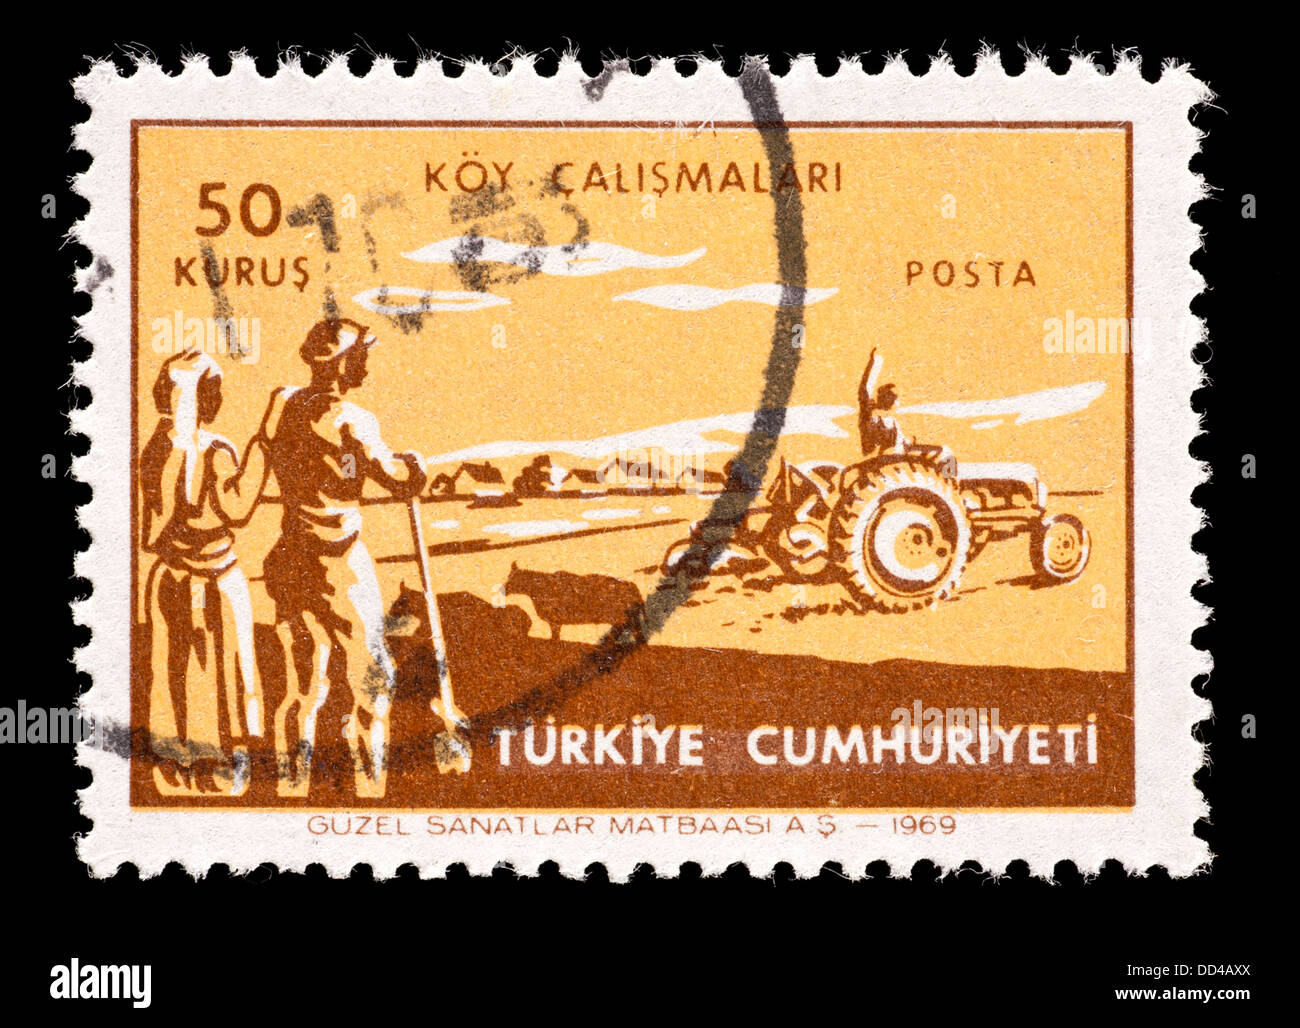 Postage stamp from Turkey depicting farming and agricultural progress. Stock Photo